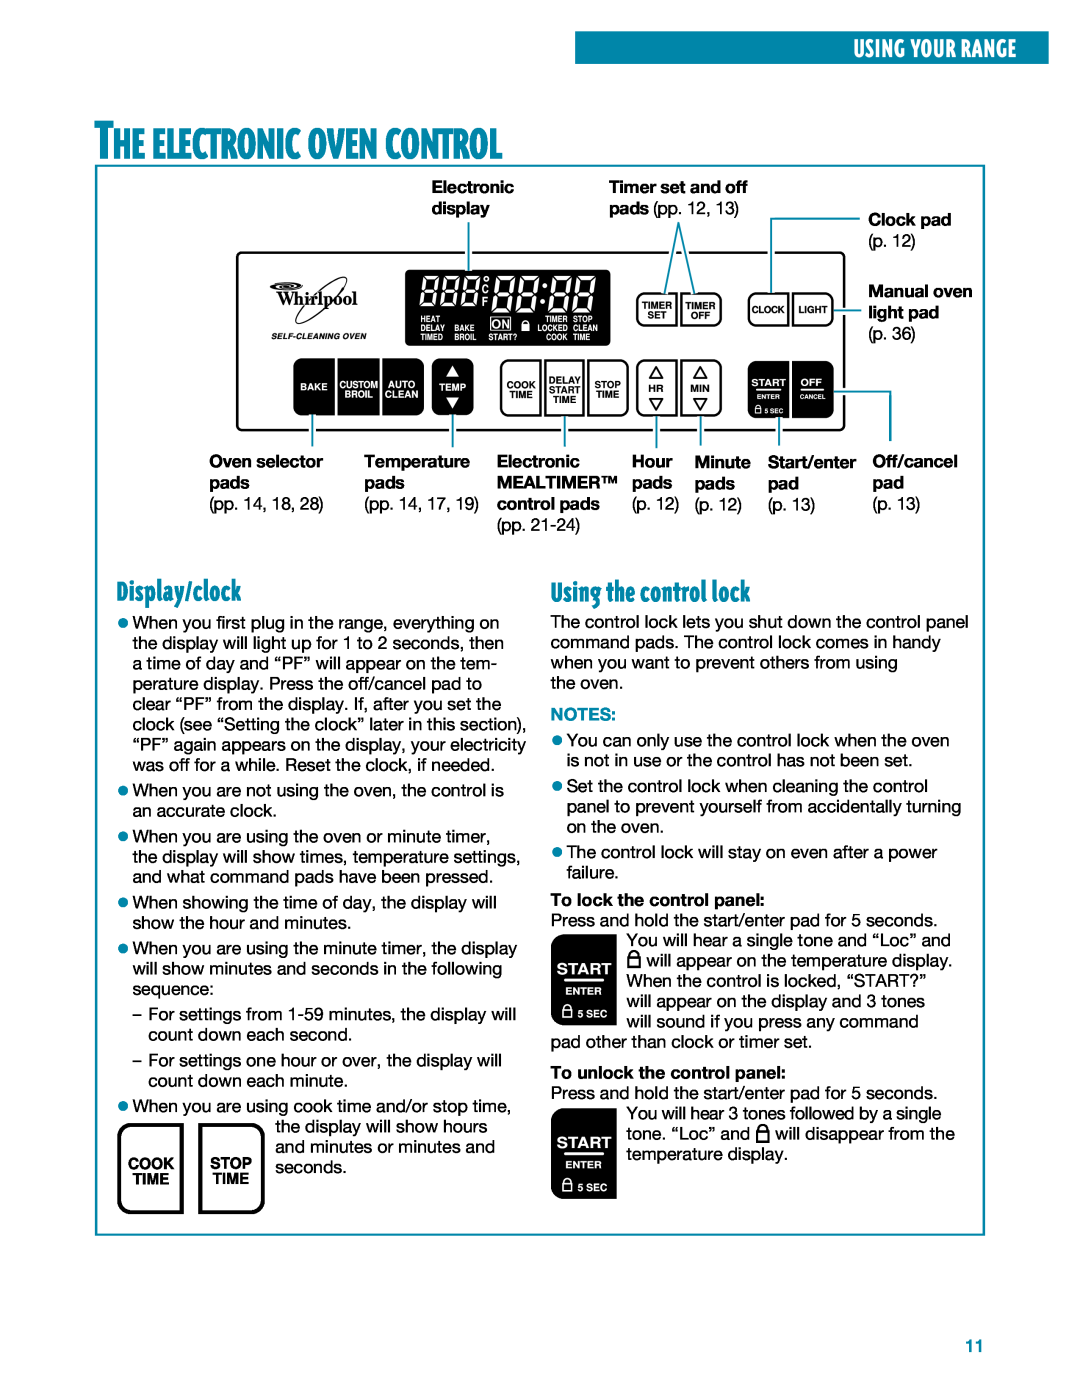 Whirlpool SF395LEE manual The Electronic Oven Control, Display/clock, Using the control lock, Using Your Range 